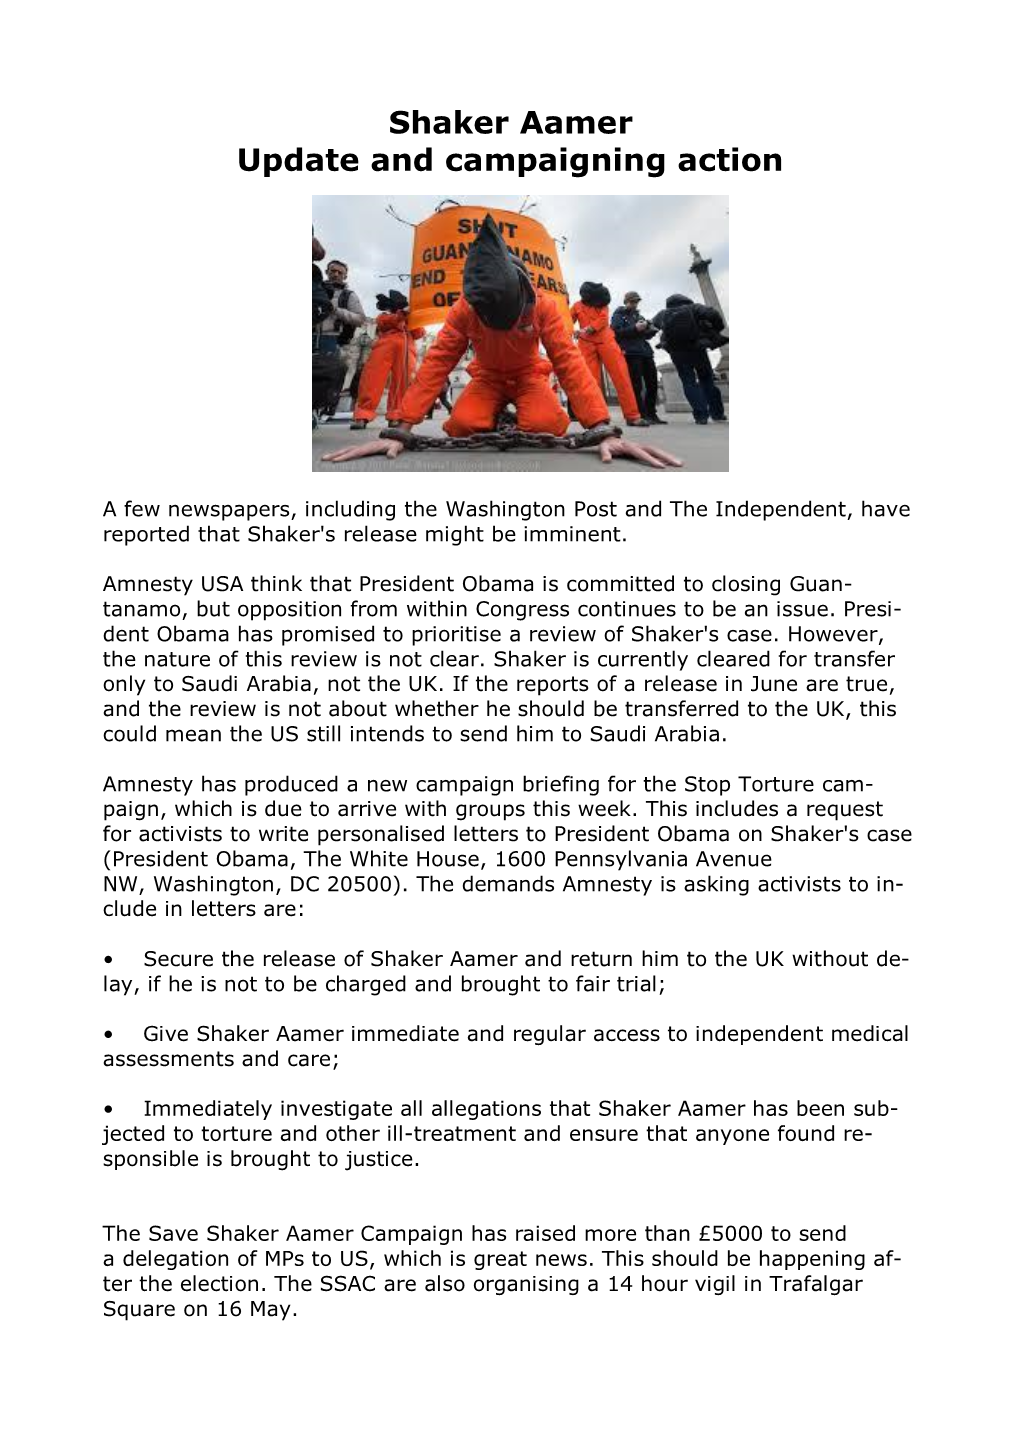 Shaker Aamer Update and Campaigning Action